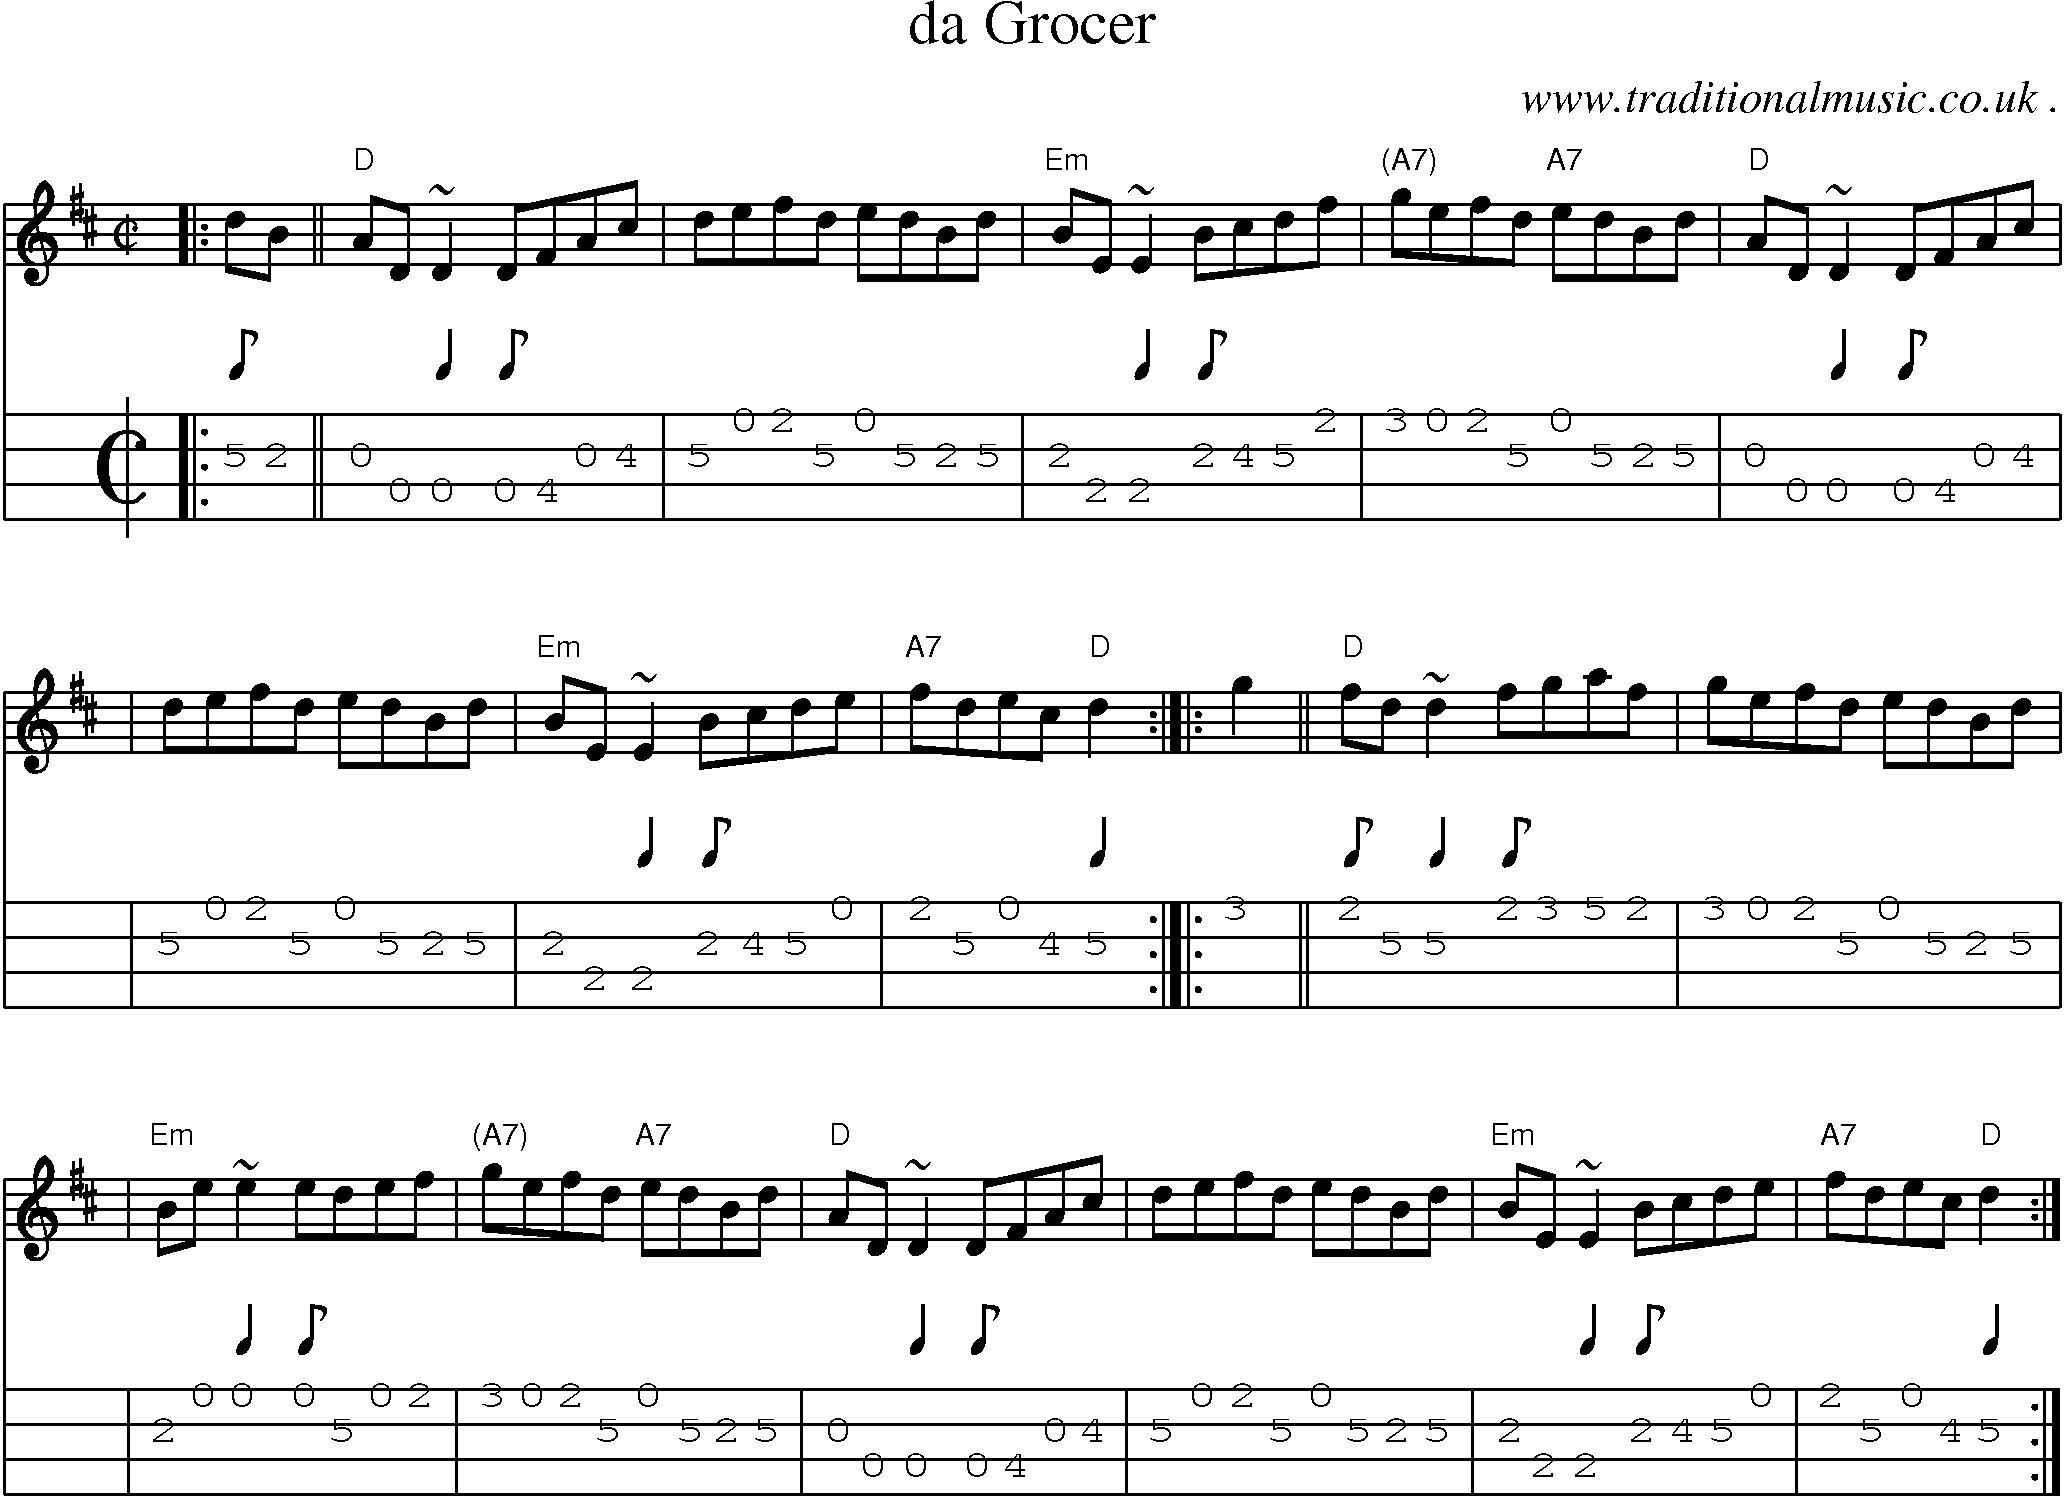 Sheet-music  score, Chords and Mandolin Tabs for Da Grocer